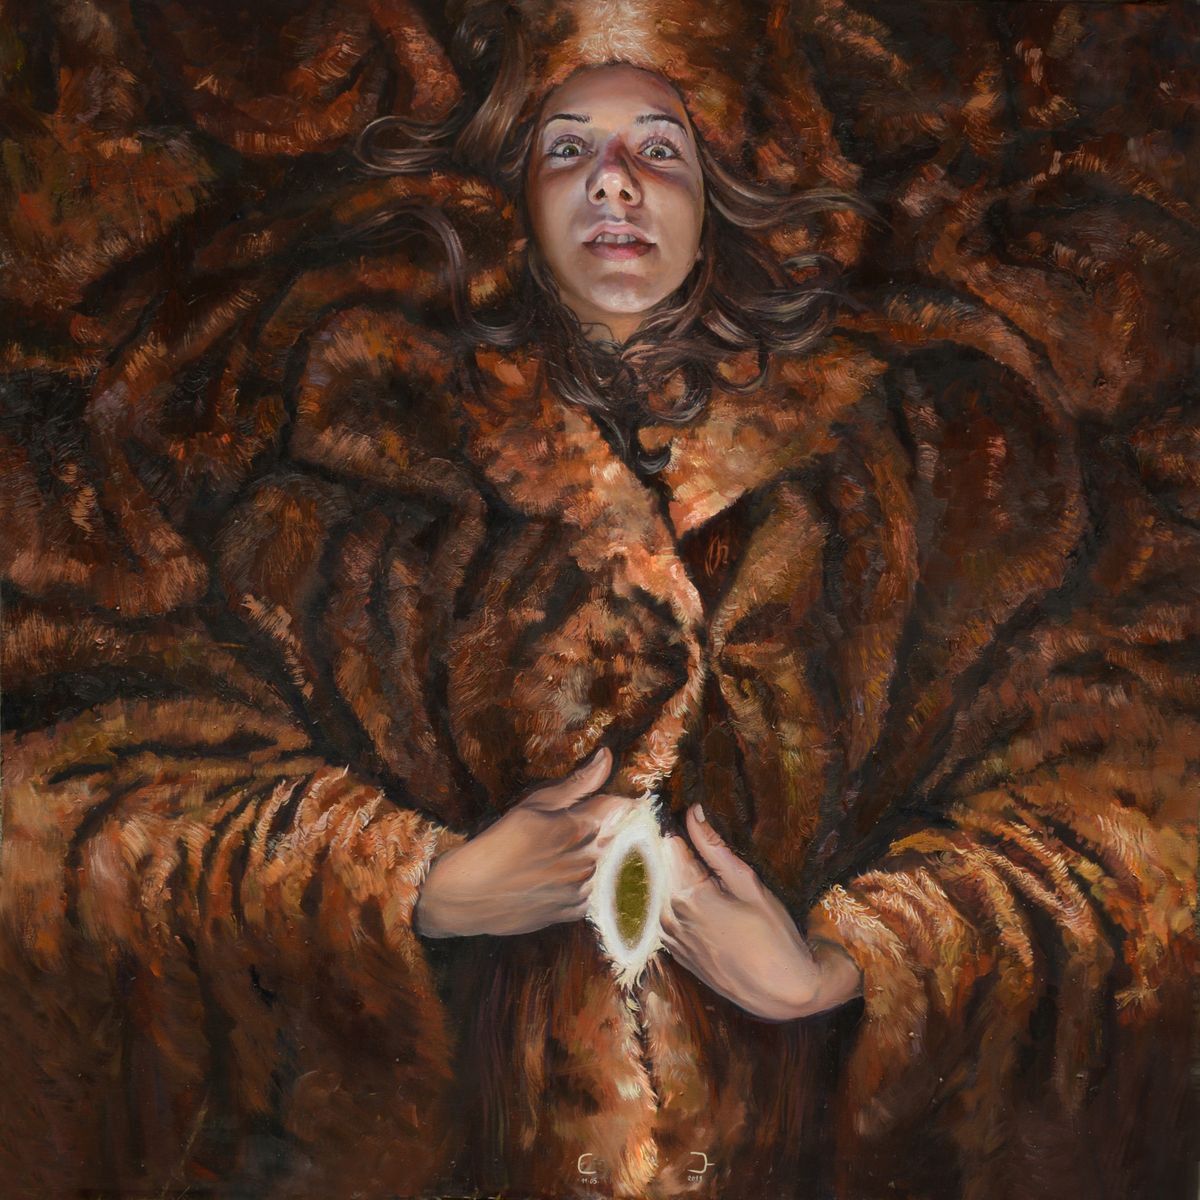 The Fur Is Always In Fashion by Suzana Dzelatovic